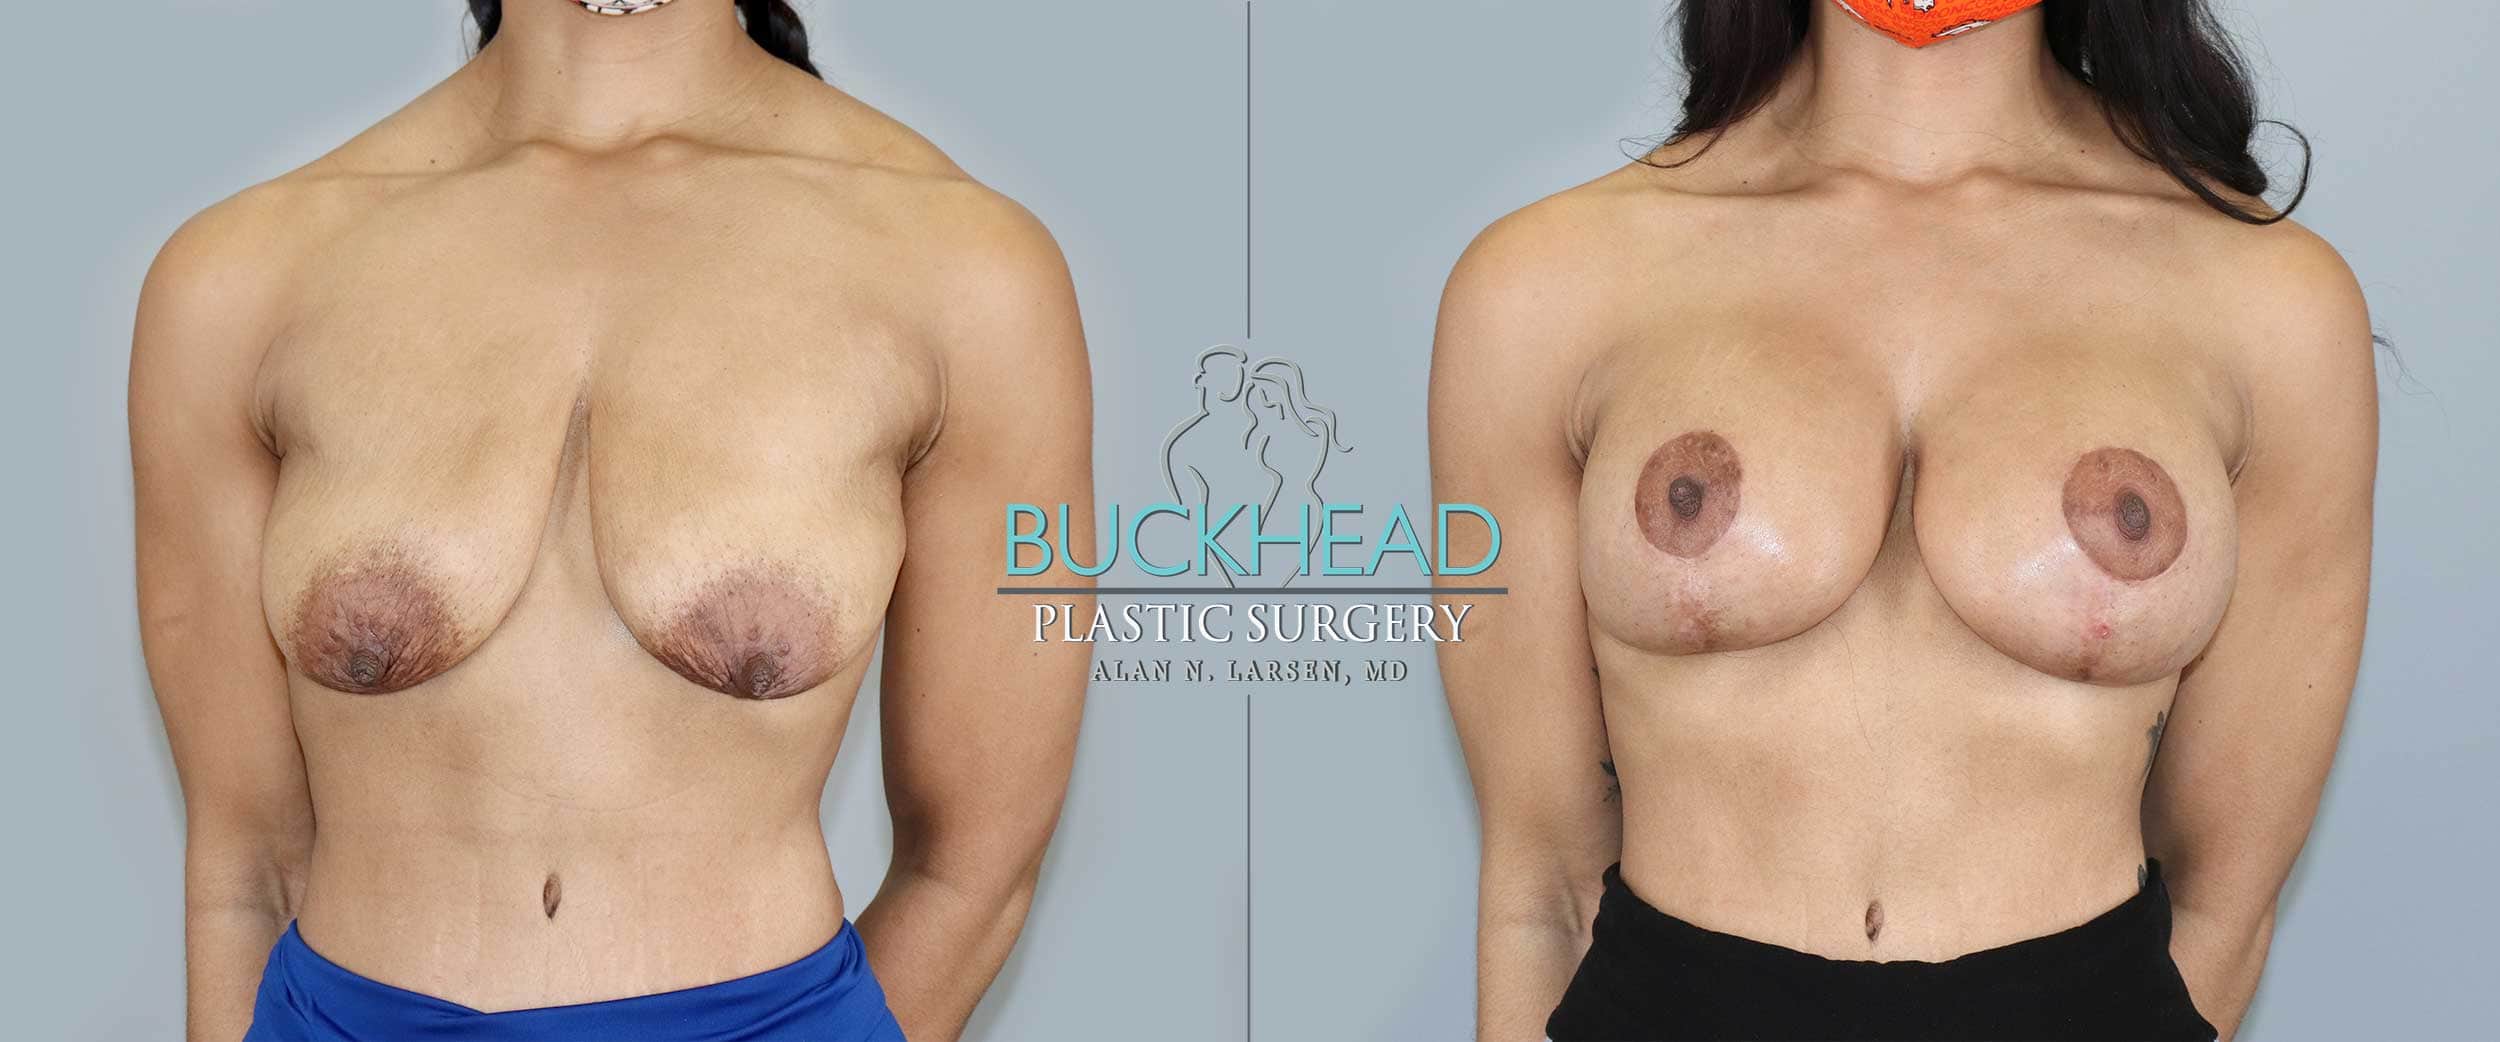 Before and After Photo Gallery | Breast Lift with Augmentation | Buckhead Plastic Surgery | Alan N. Larsen, MD | Board-Certified Plastic Surgeon | Atlanta GA